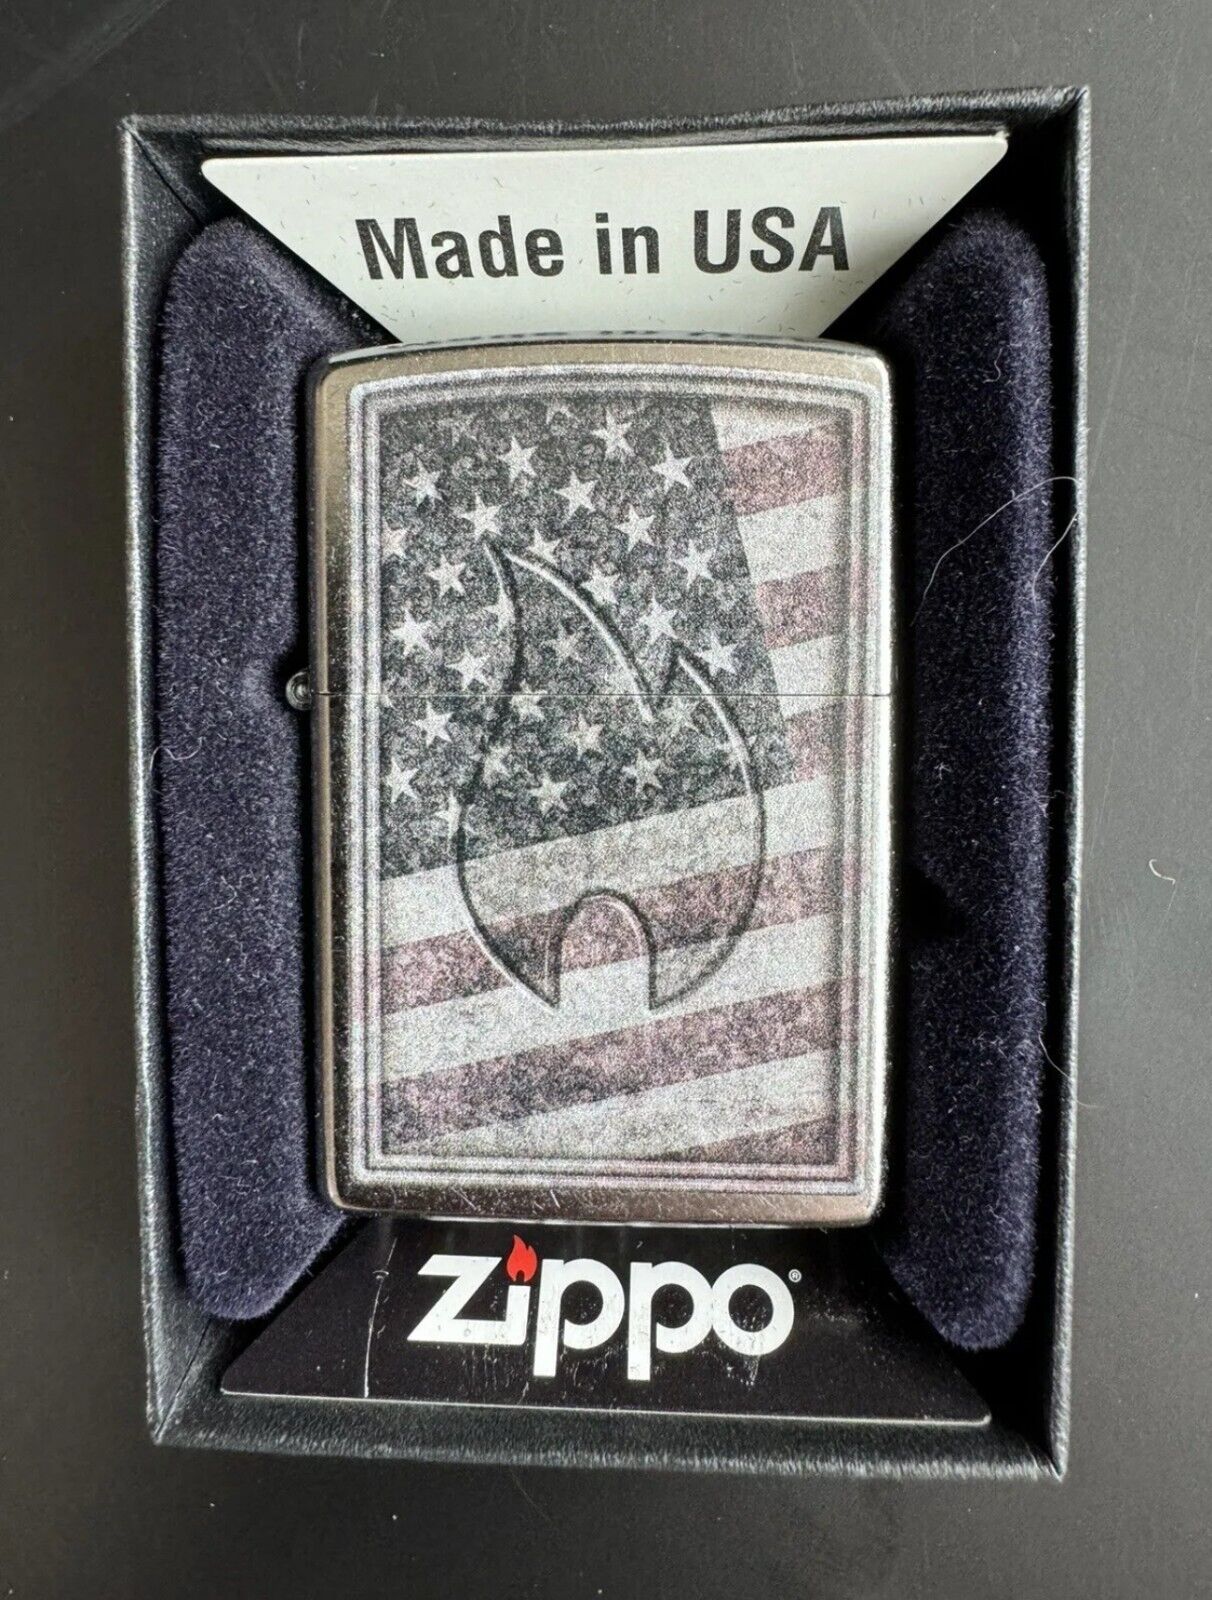 🔥 17 Brand New with Box ZIPPO Lighters 🔥 Pick and Choose